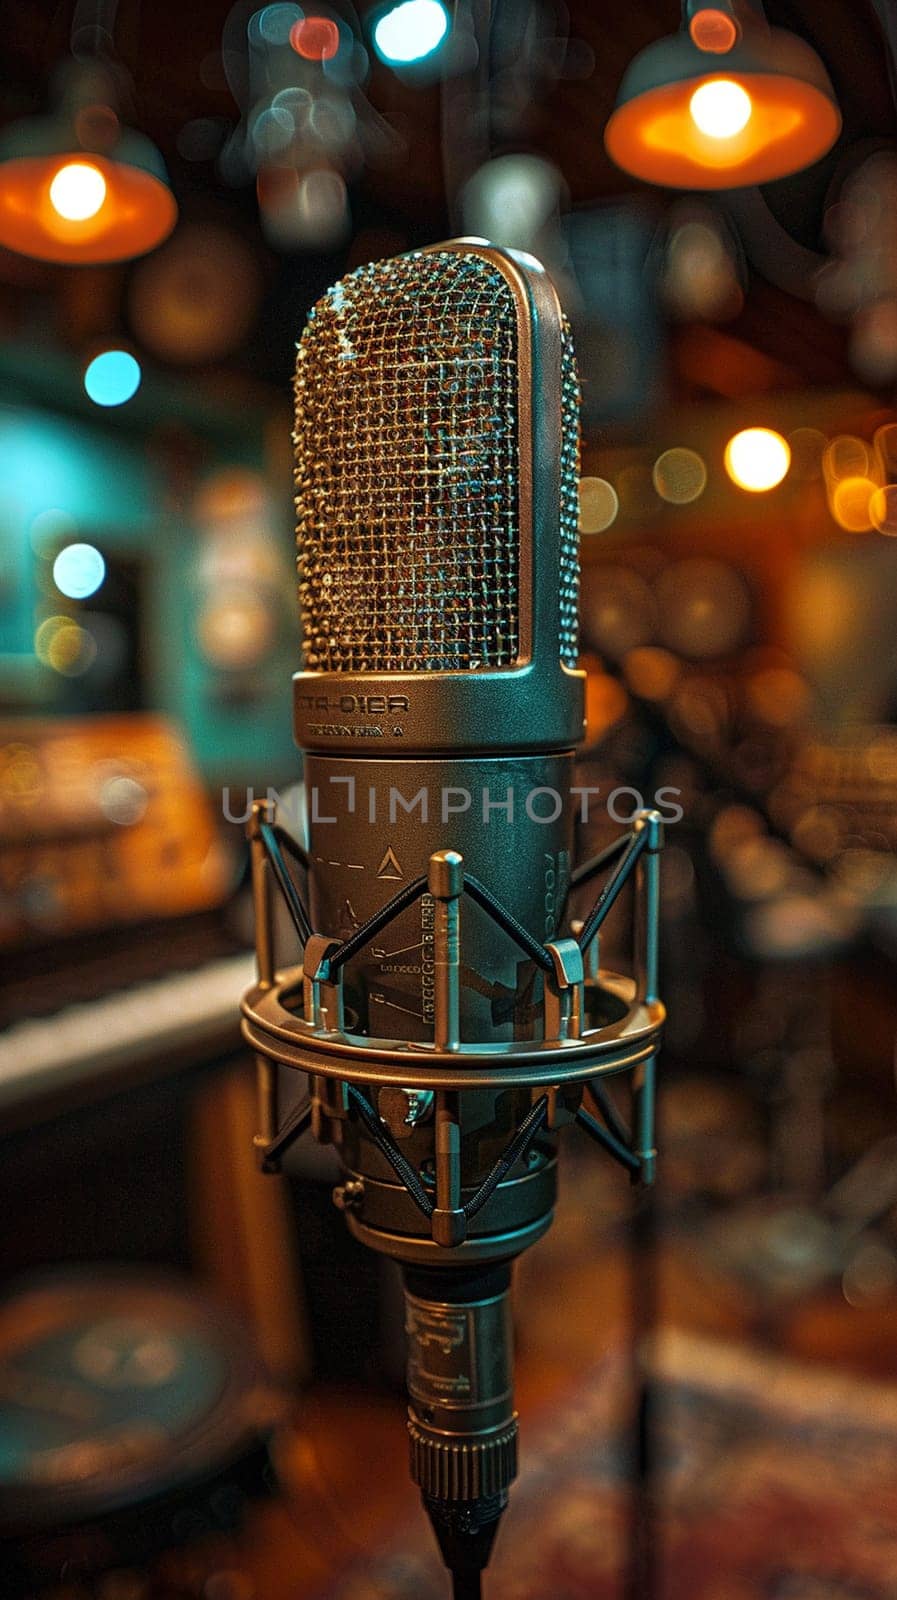 Recording Studio Microphone Captures Melody in Business of Music Production, Pop filters and cables weave a harmonious tale of sound and talent in the music business.